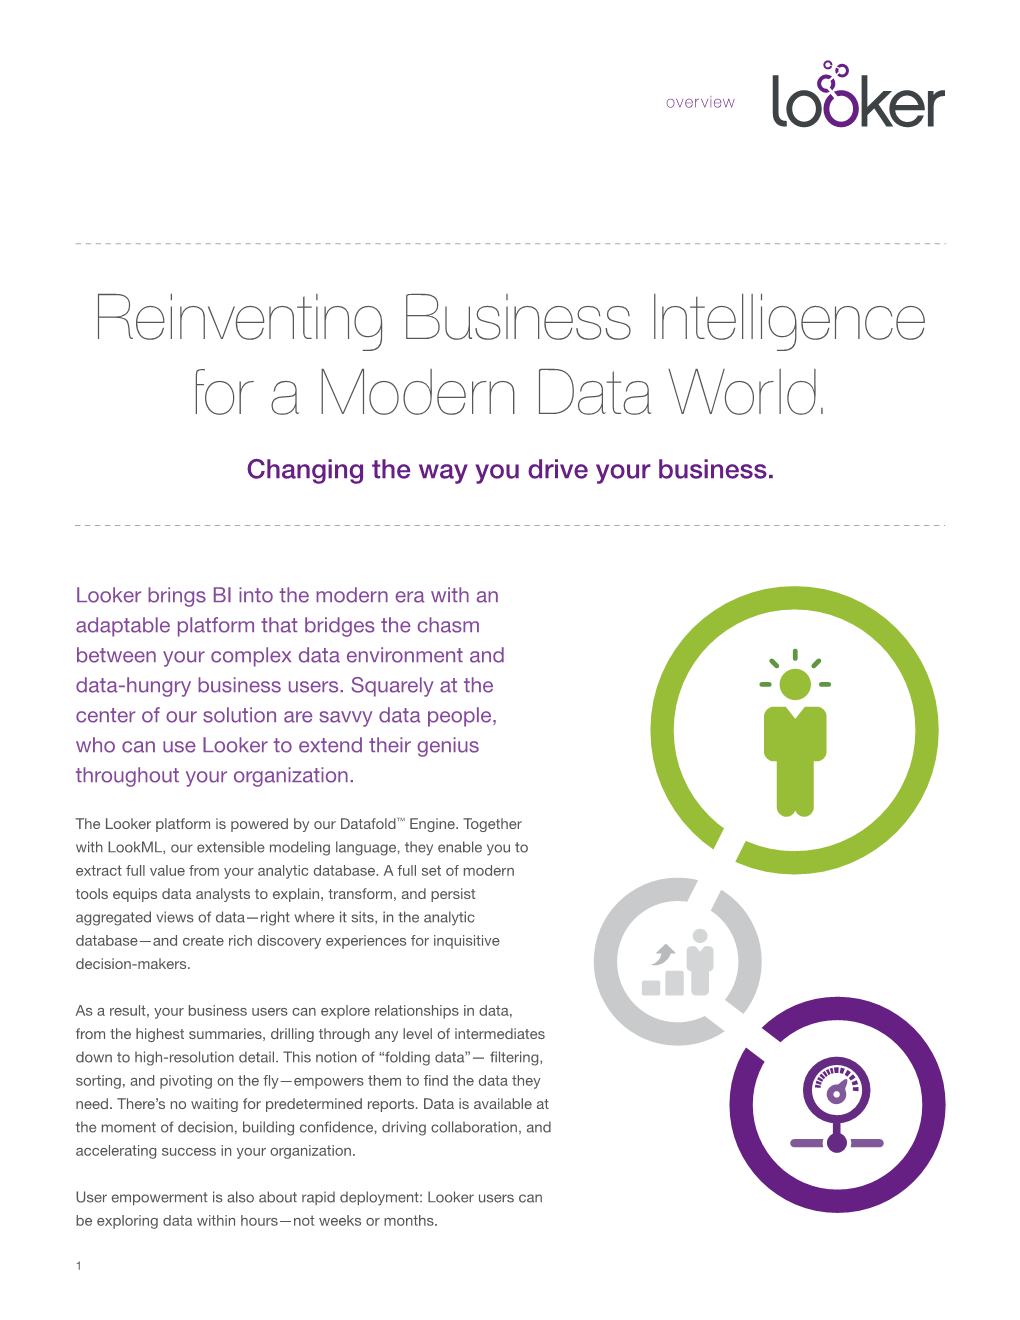 Reinventing Business Intelligence for a Modern Data World